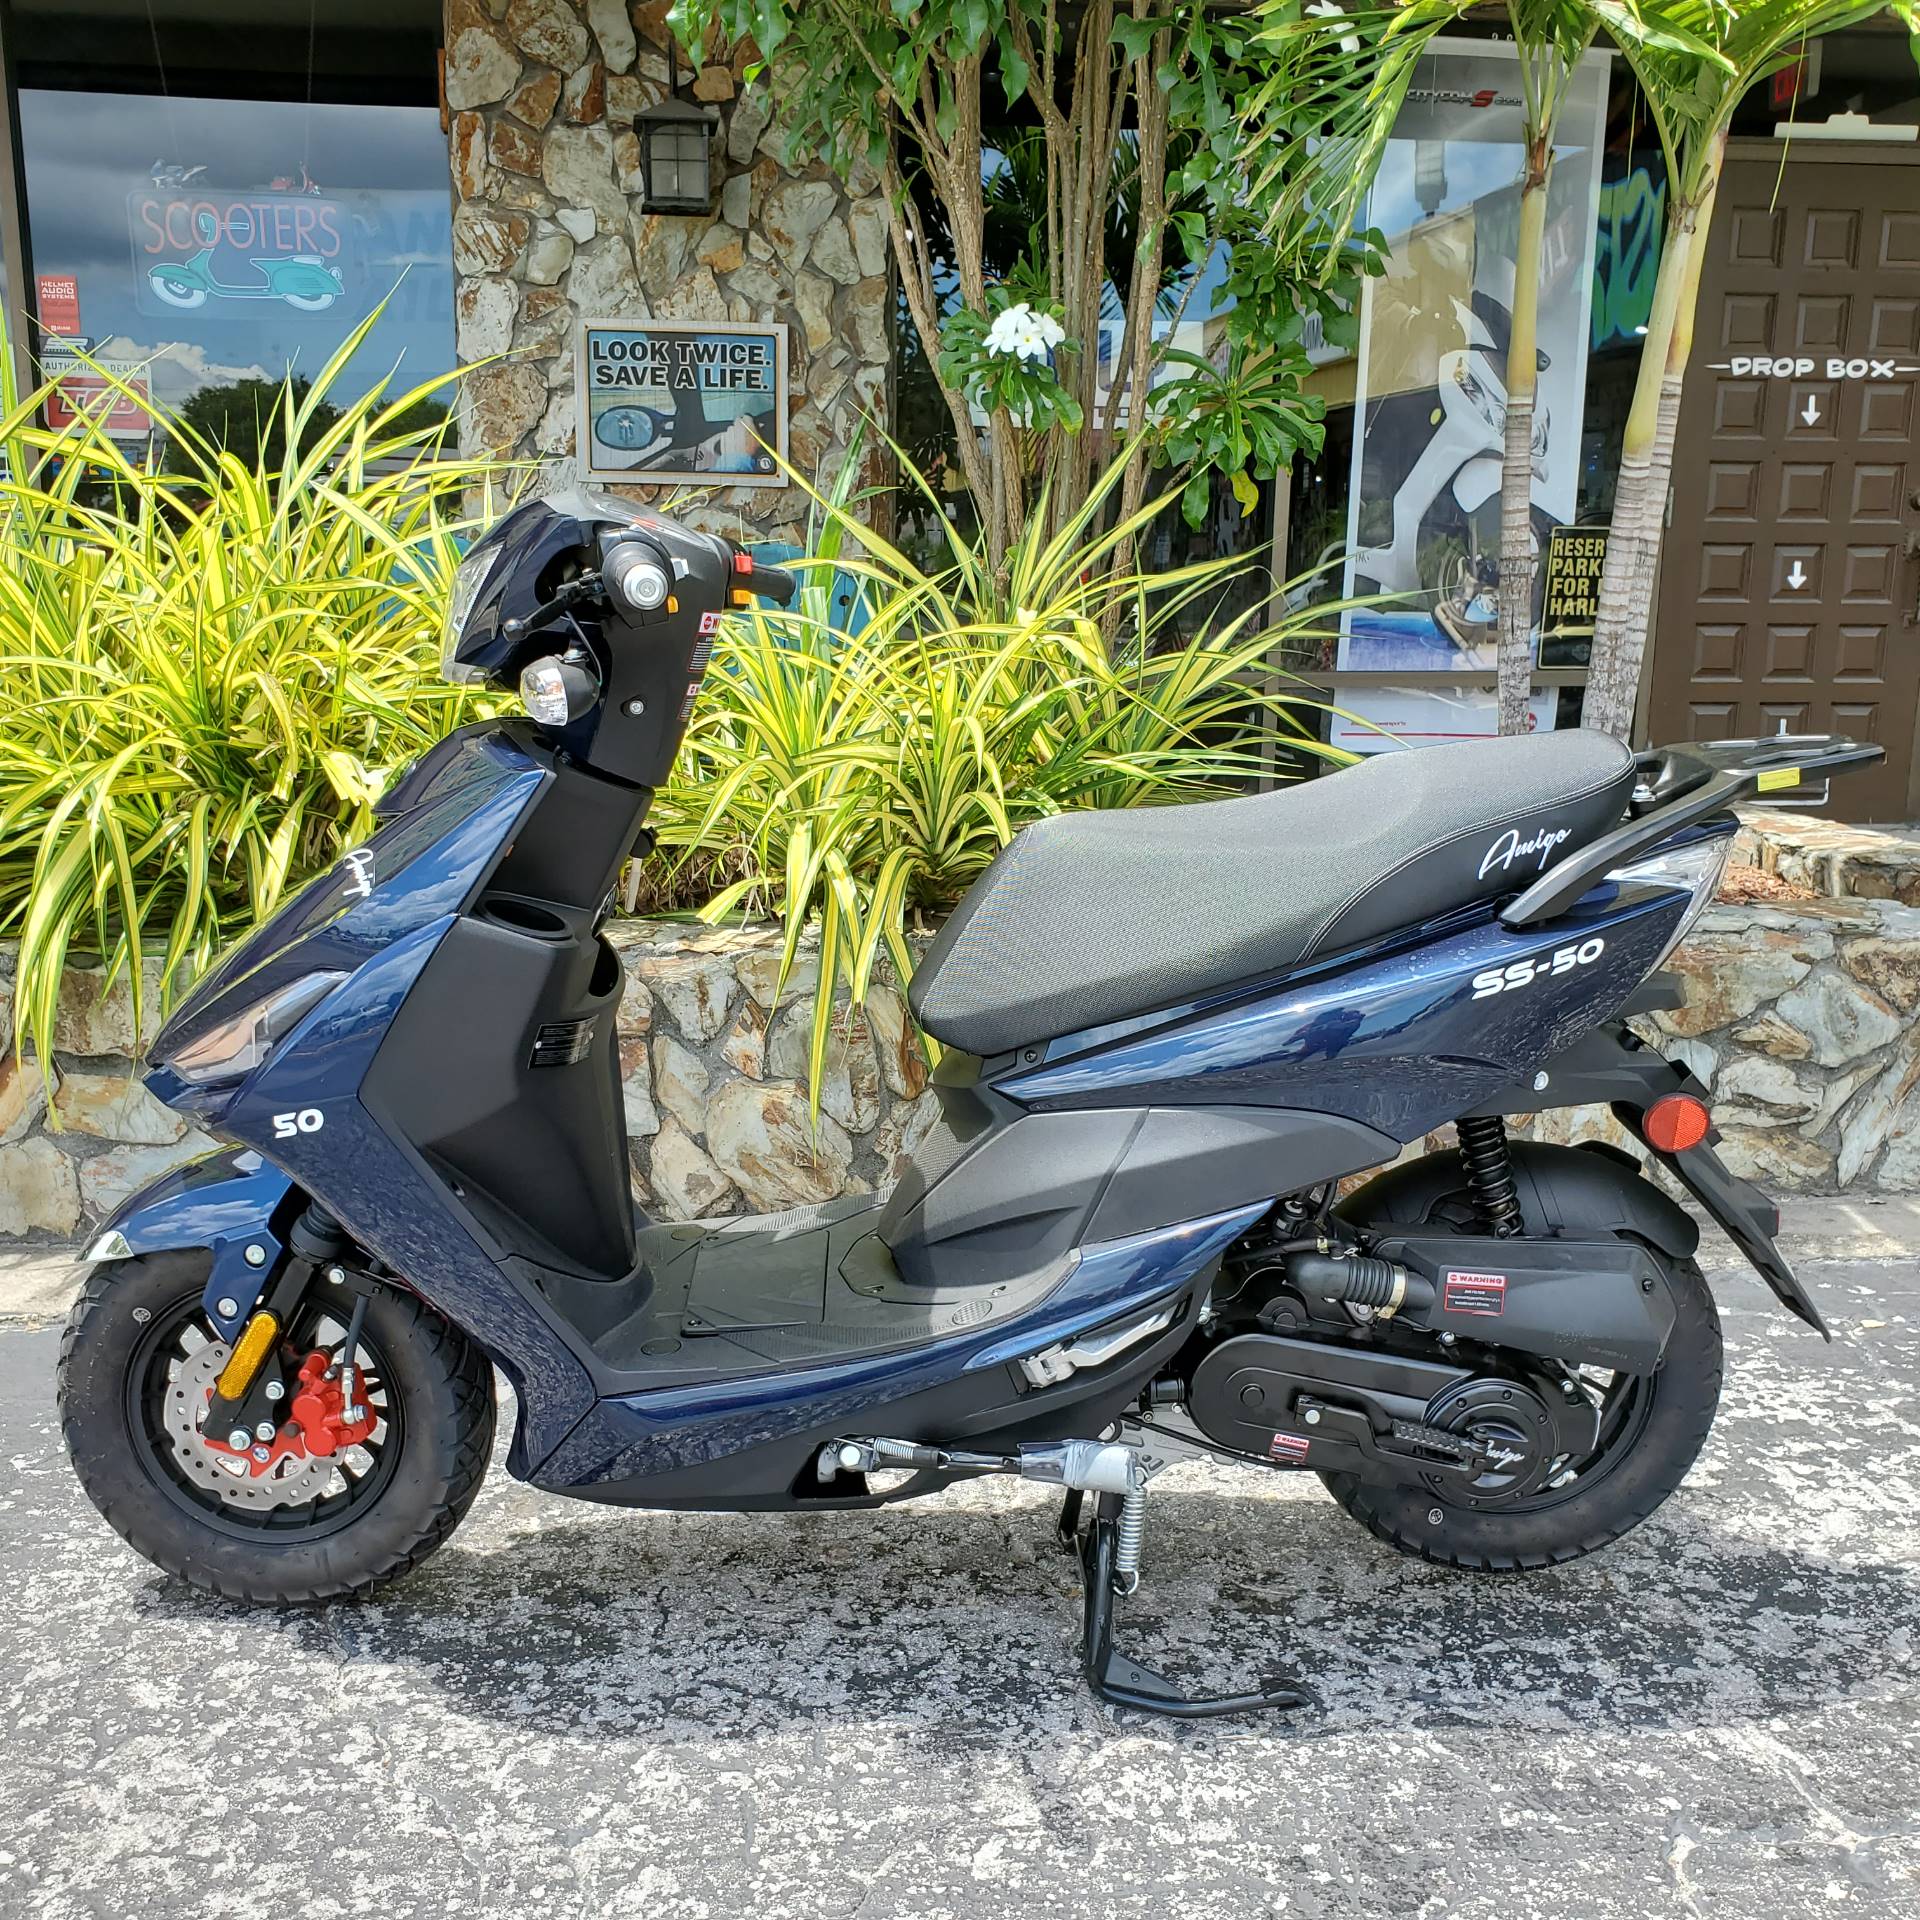 Amigo SS50 49cc Scooter Fully Assembled